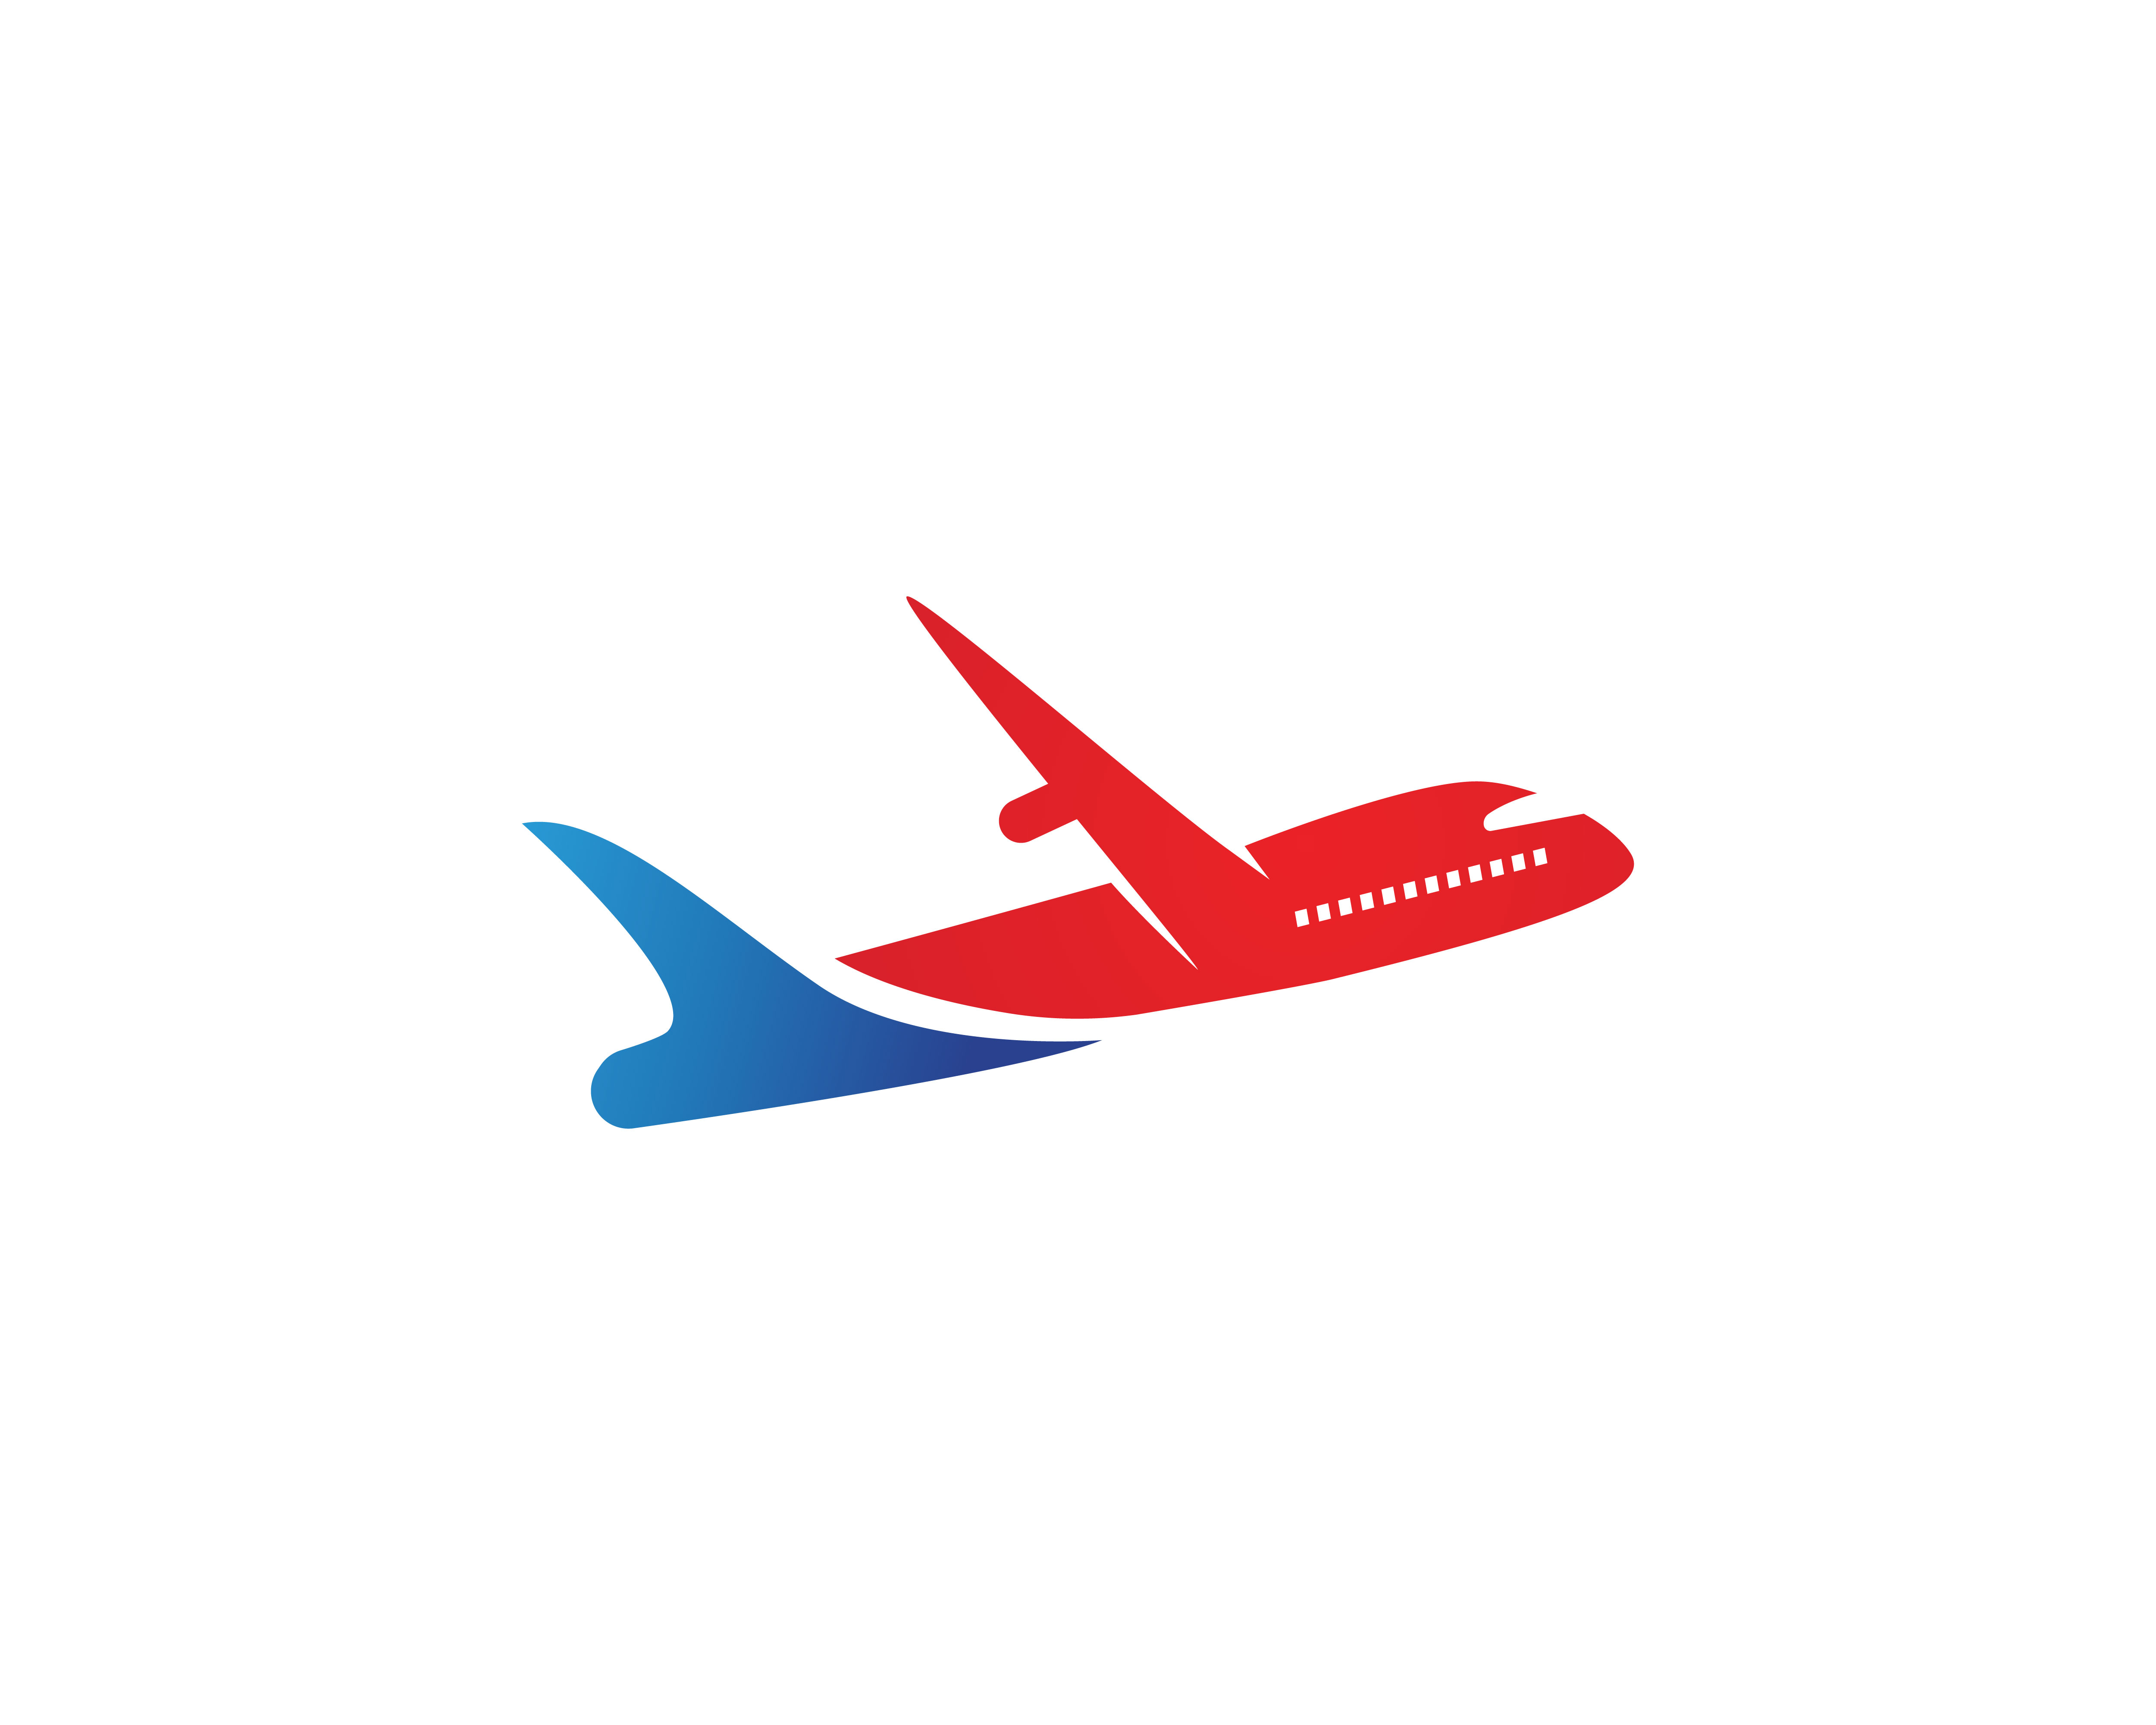 Aircraft, airplane, airline logo label. Journey, air